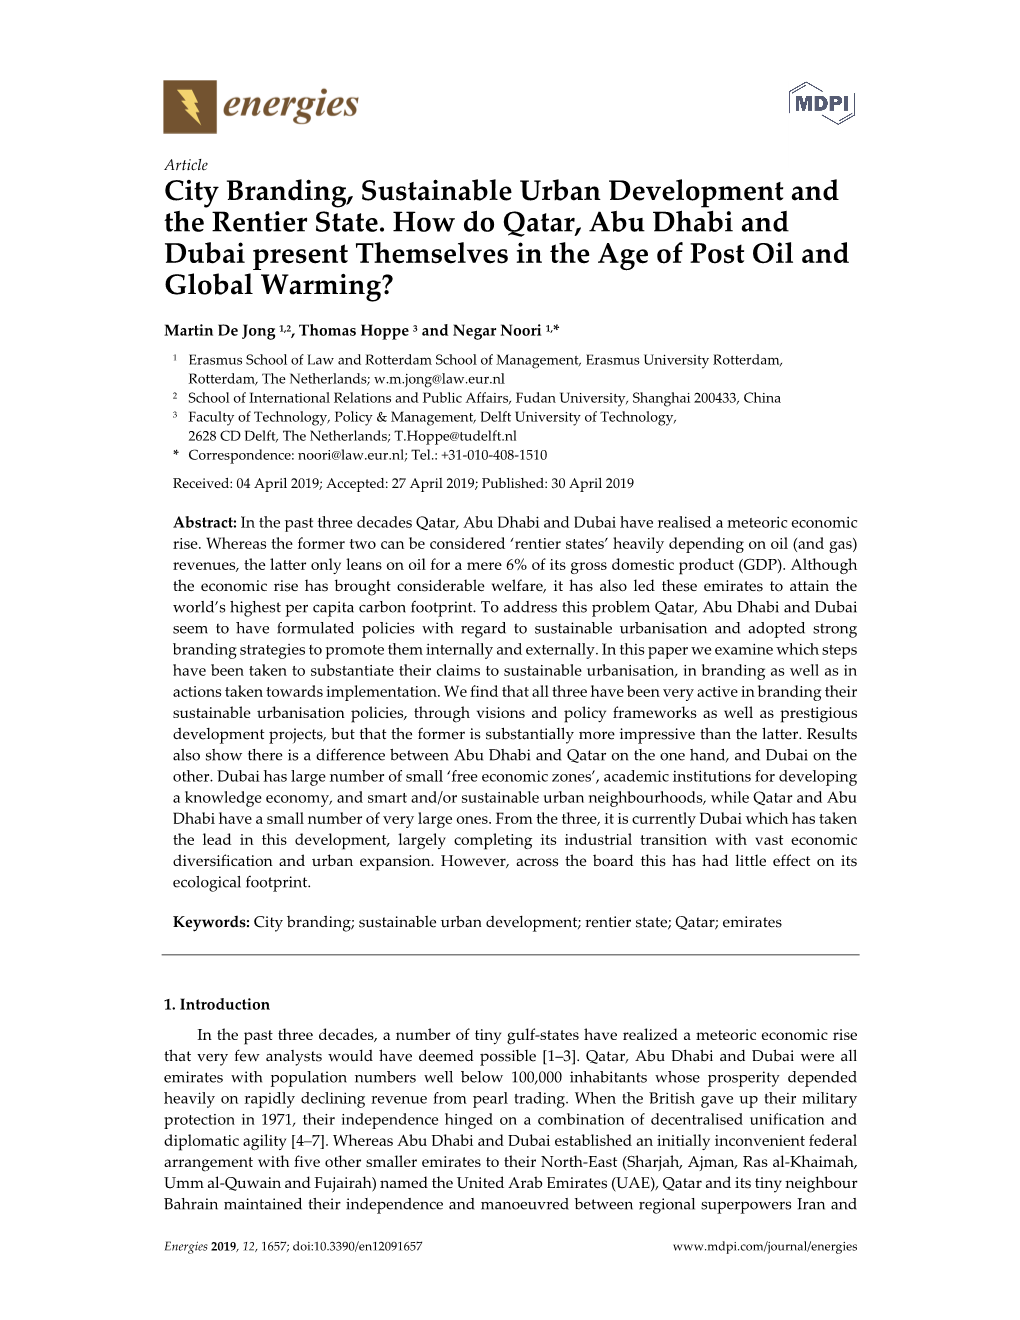 City Branding, Sustainable Urban Development and the Rentier State